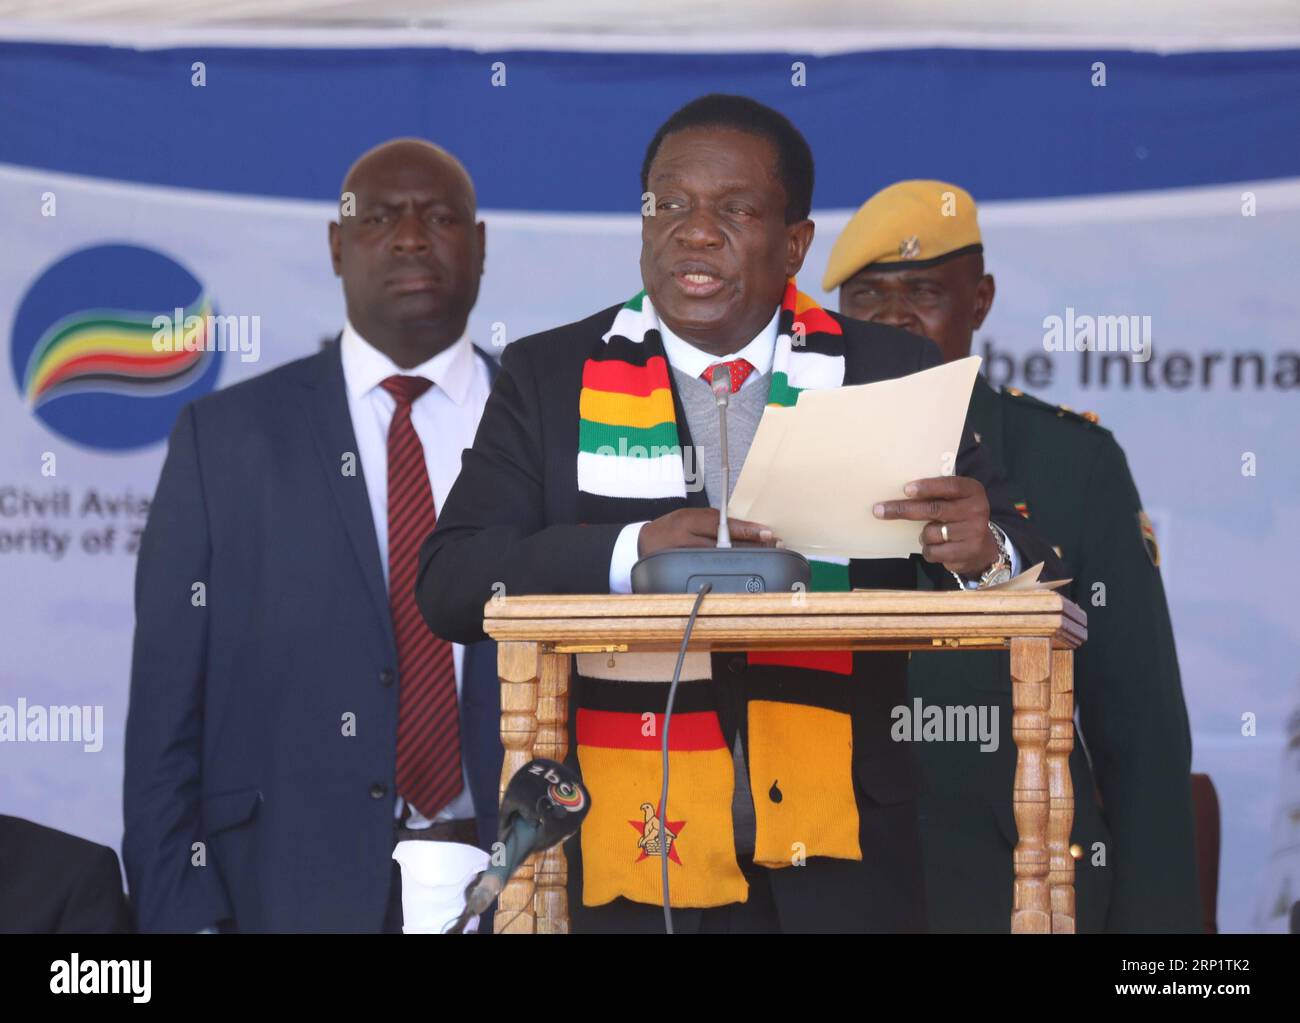 (180723) -- HARARE, July 23, 2018 -- Zimbabwean President Emmerson Mnangagwa (Front) addresses a groundbreaking ceremony of the upgrading and expansion project of the Robert Gabriel Mugabe International Airport in Harare, Zimbabwe, on July 23, 2018. Zimbabwe s main airport is set to undergo a major facelift to be funded by China as part of the government s efforts to transform the facility into a regional aviation hub. ) ZIMBABWE-HARARE-AIRPORT-UPGRADING AND EXPANSION WORK ShaunxJusa PUBLICATIONxNOTxINxCHN Stock Photo